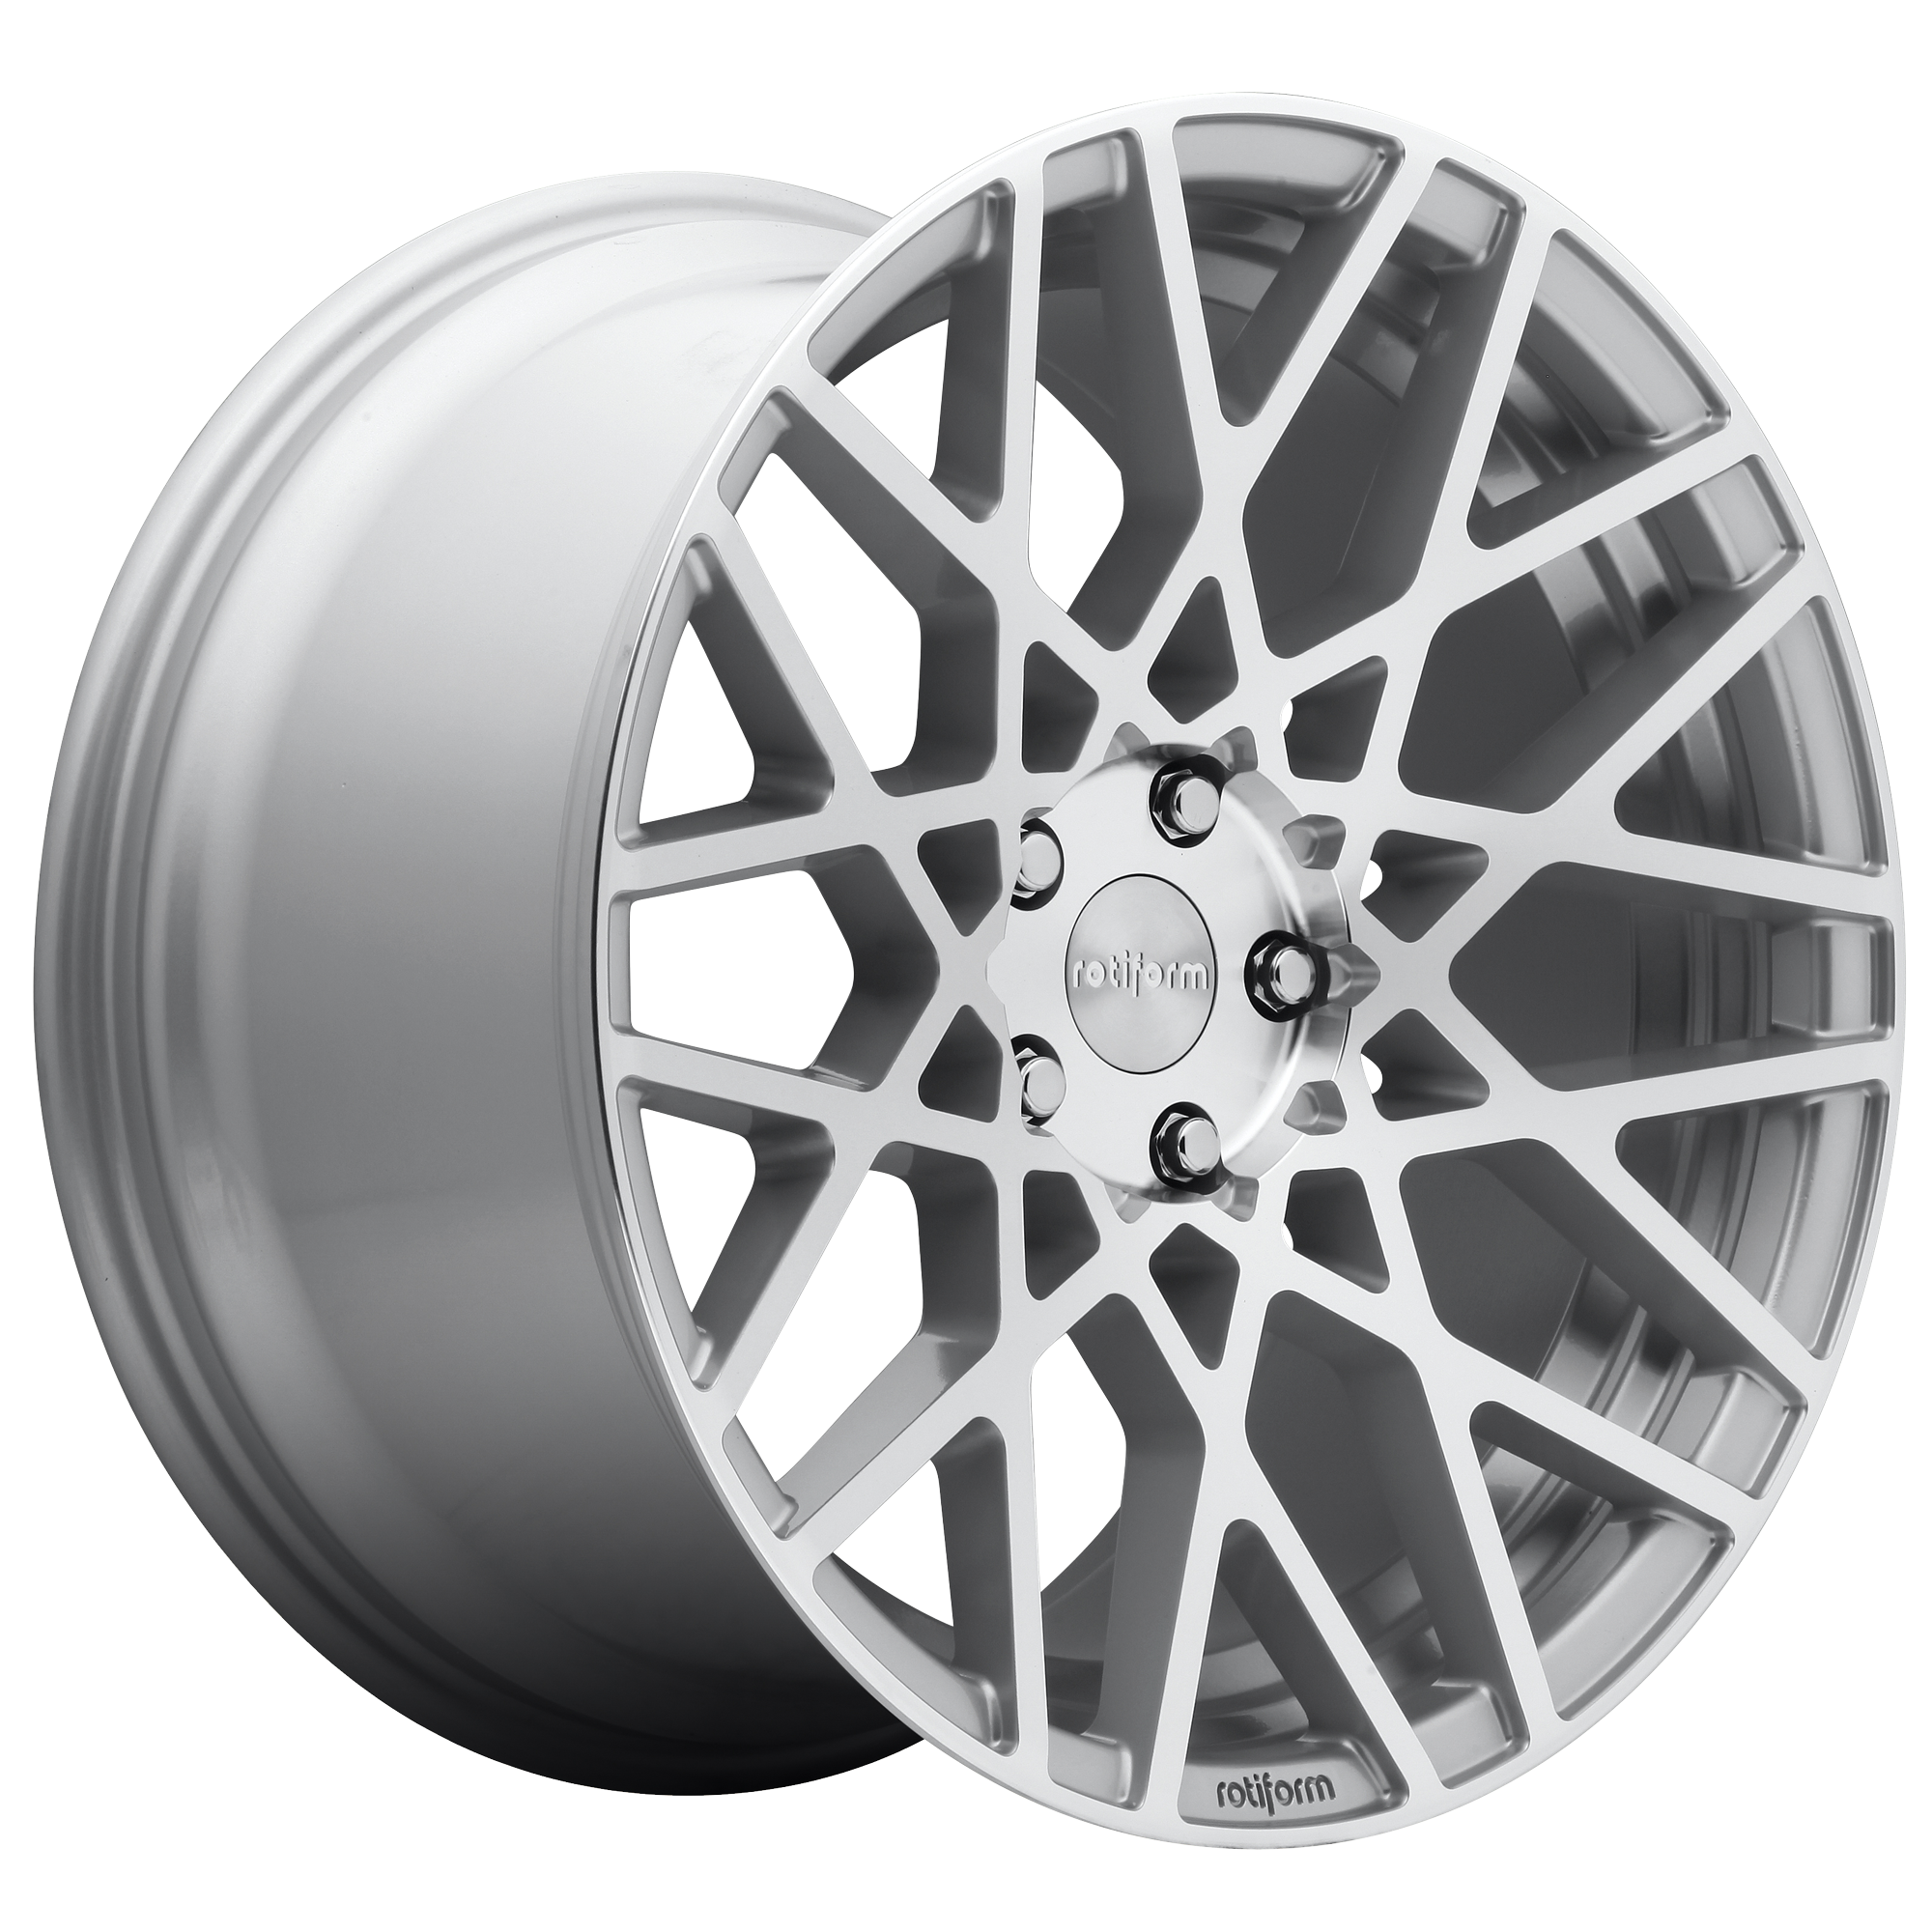 BLQ 18x8.5 5x100.00 GLOSS SILVER MACHINED (35 mm) - Tires and Engine Performance